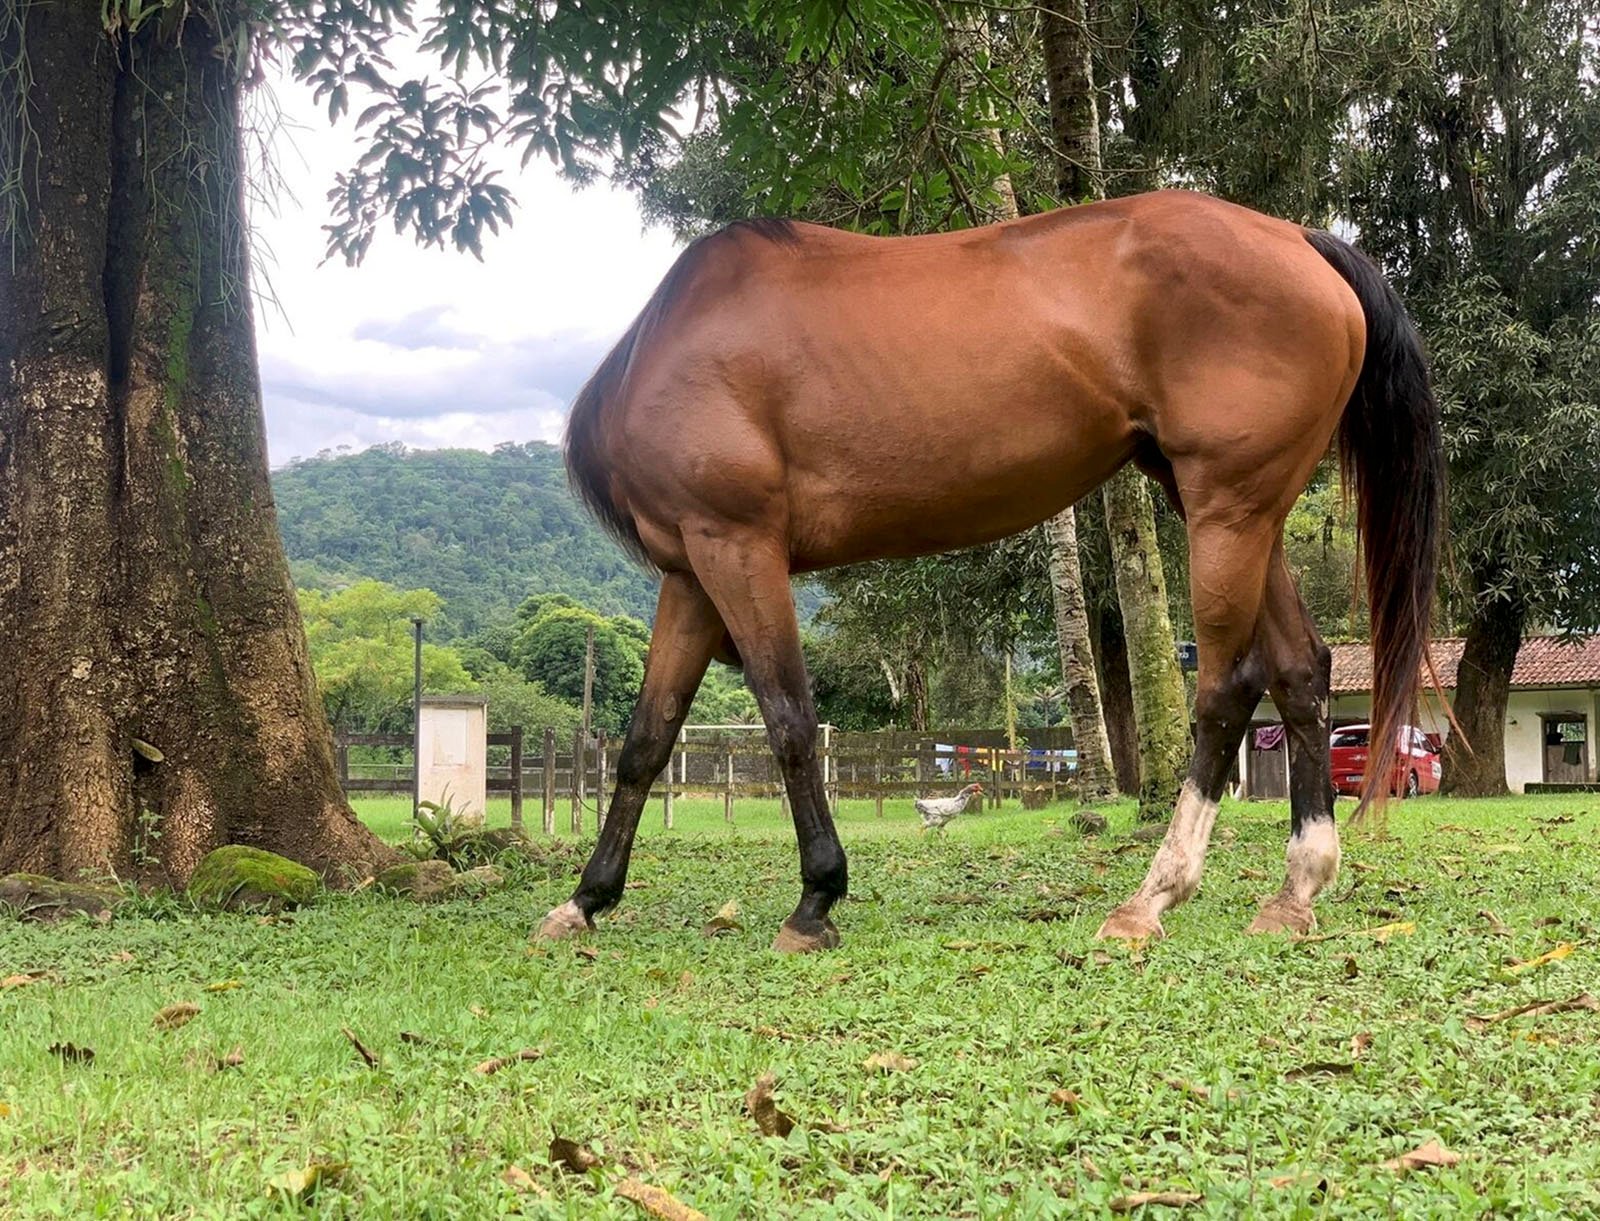 A brown horse grazing in a lush green pasture surrounded by trees, with a mountainous backdrop and a partial view of rural buildings.